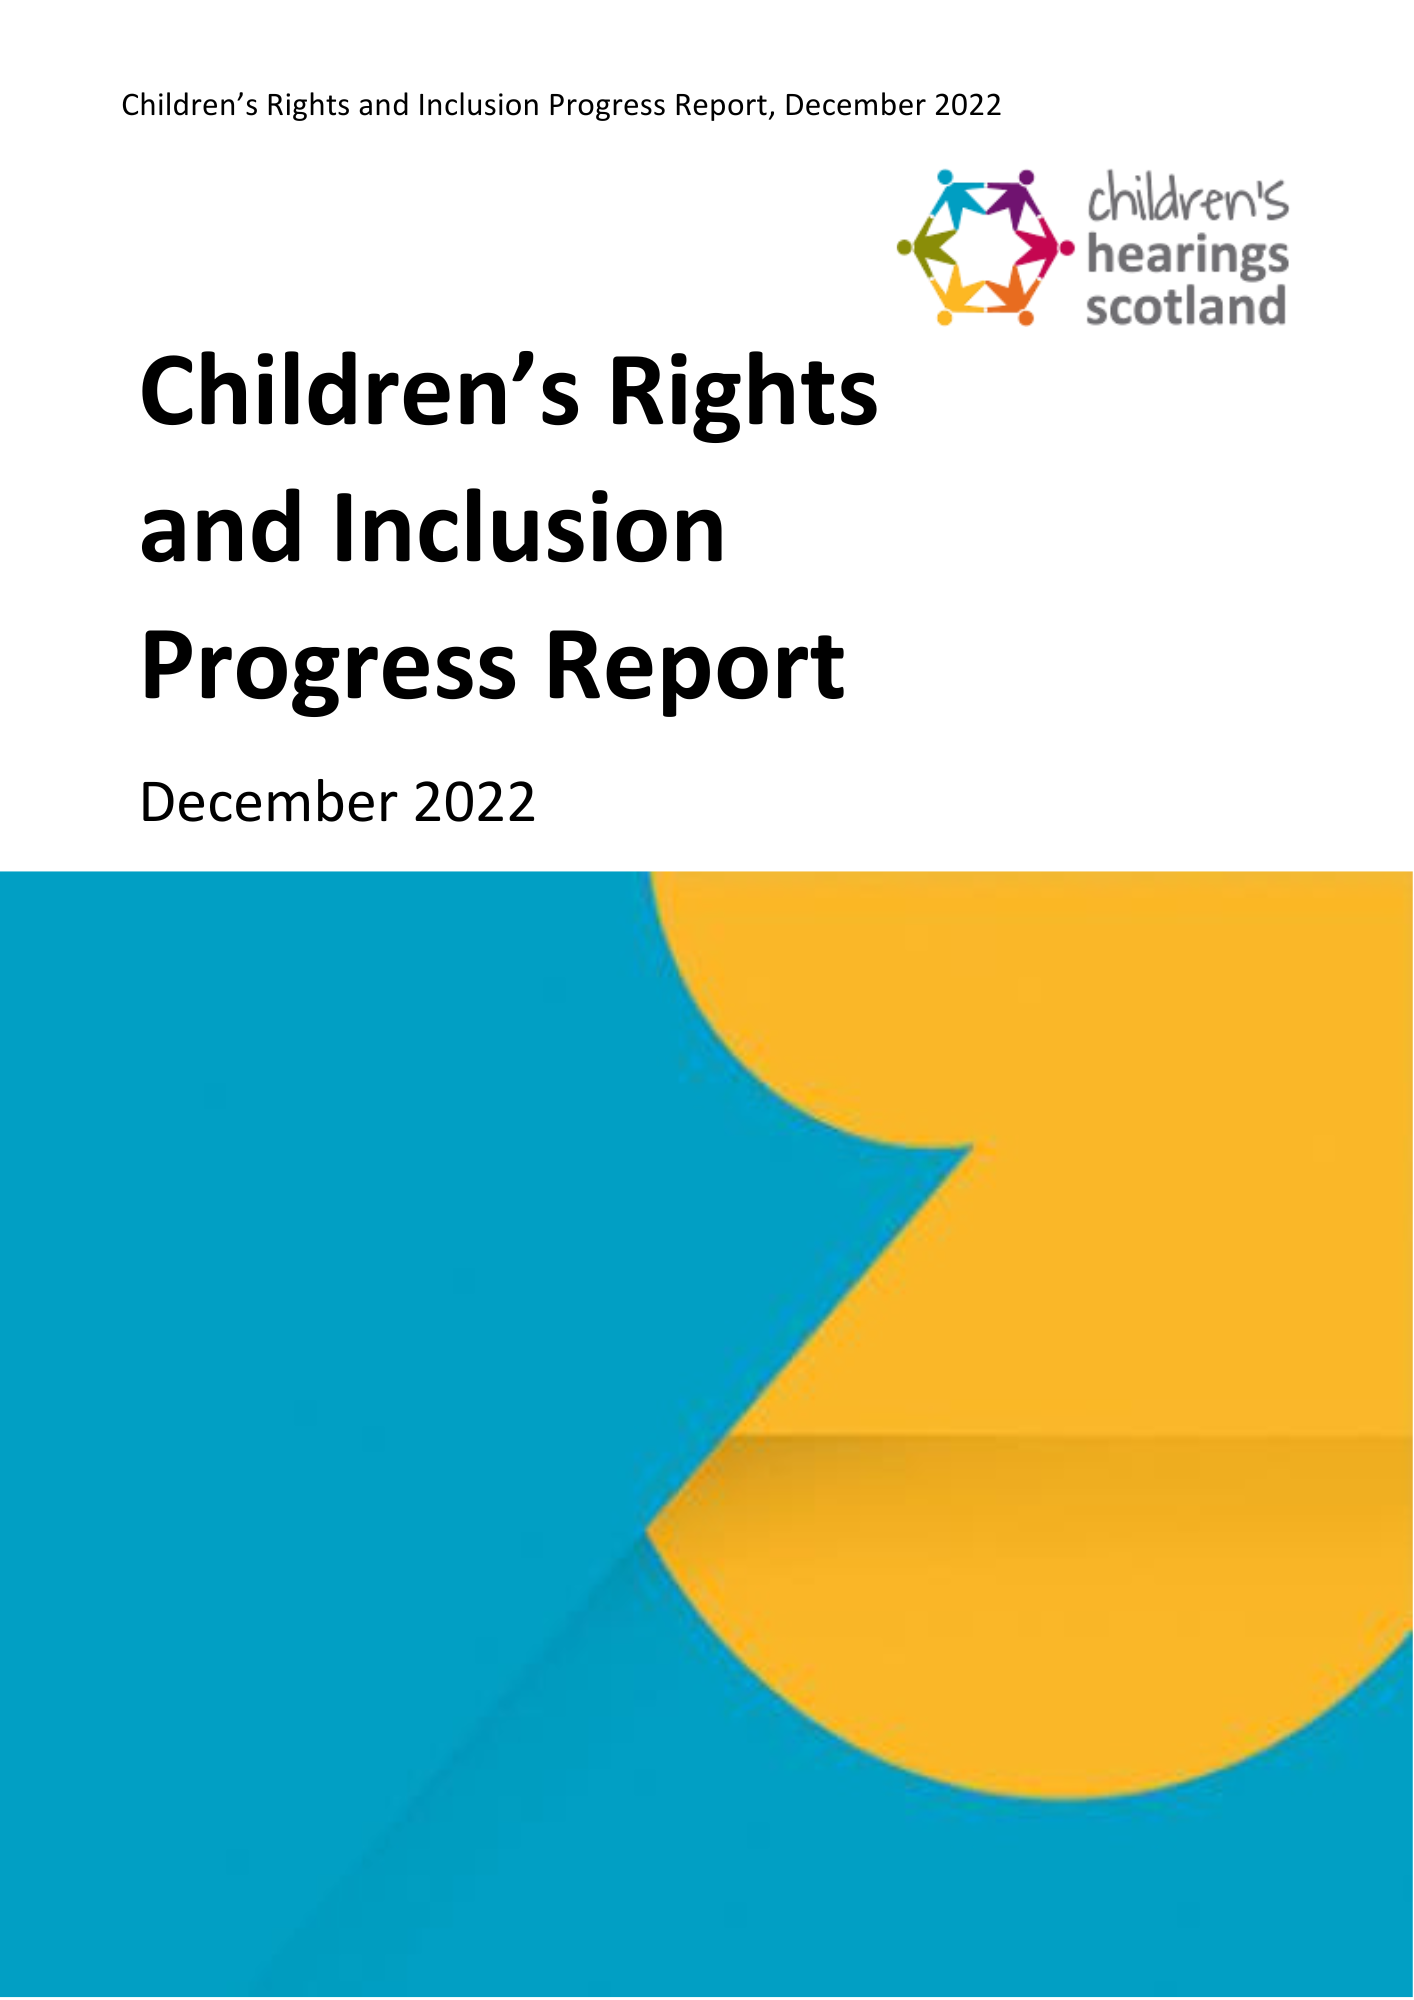 Children's Rights and Inclusion Report, December 2022